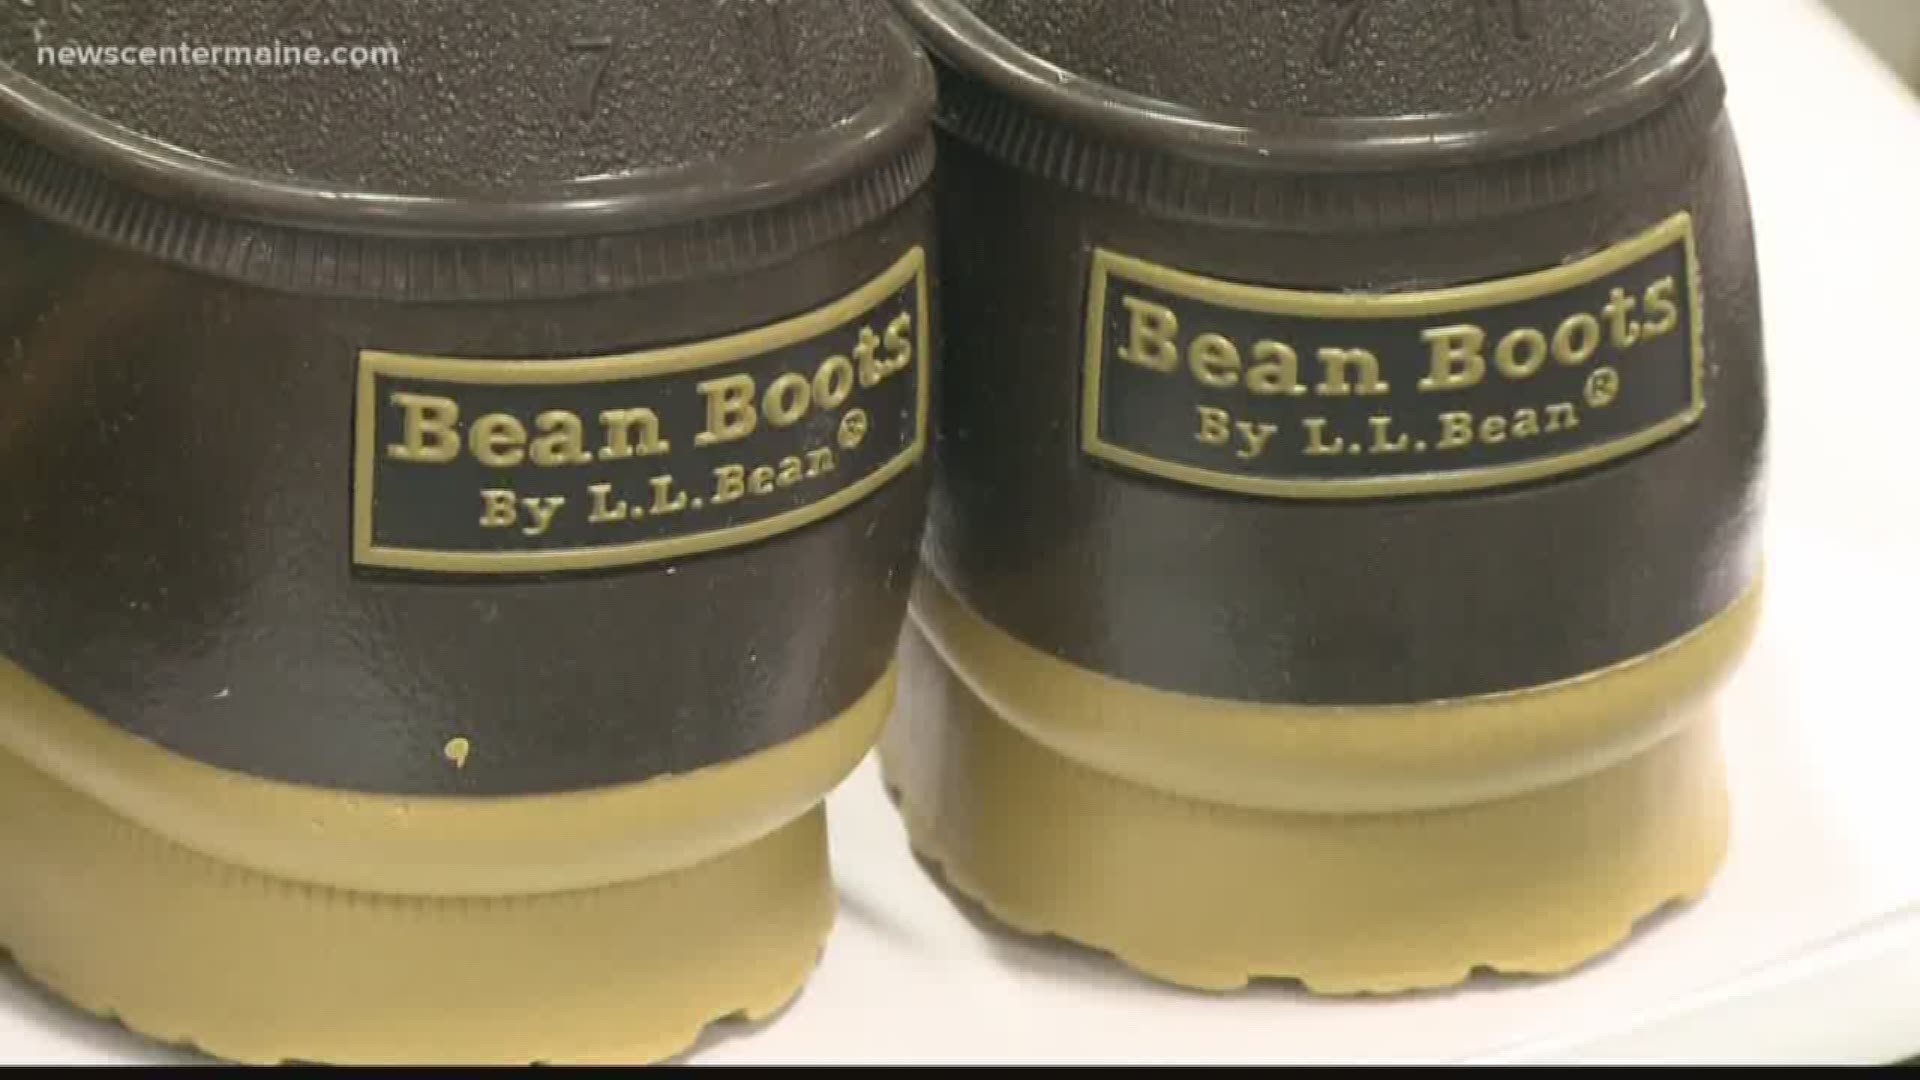 The history of the return policy at LL Bean